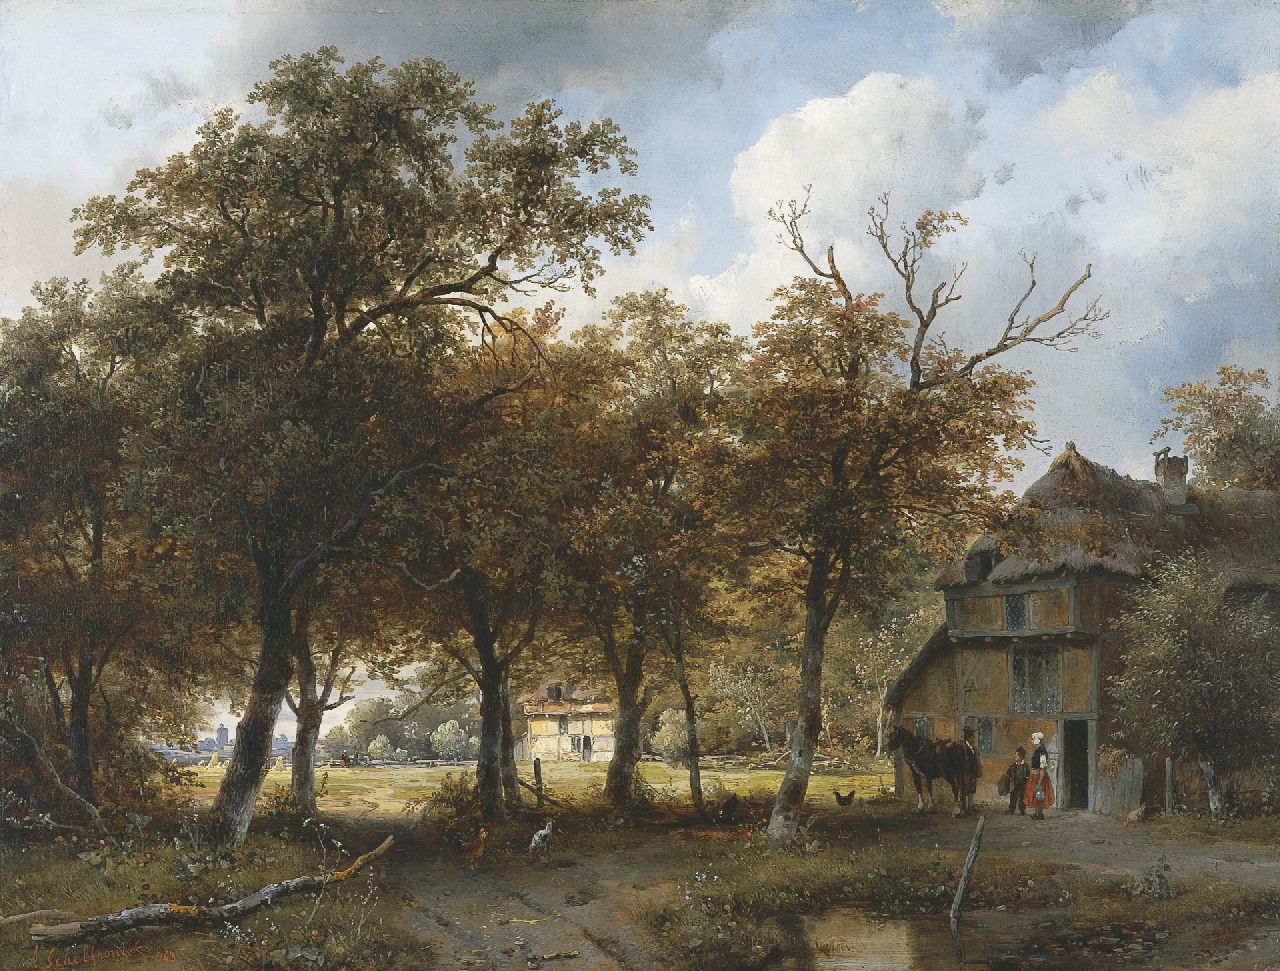 Schelfhout A.  | Andreas Schelfhout, A wooded landscape with farms and a city in the distance, Öl auf Holz 40,3 x 52,9 cm, signed l.l. und painted 1843